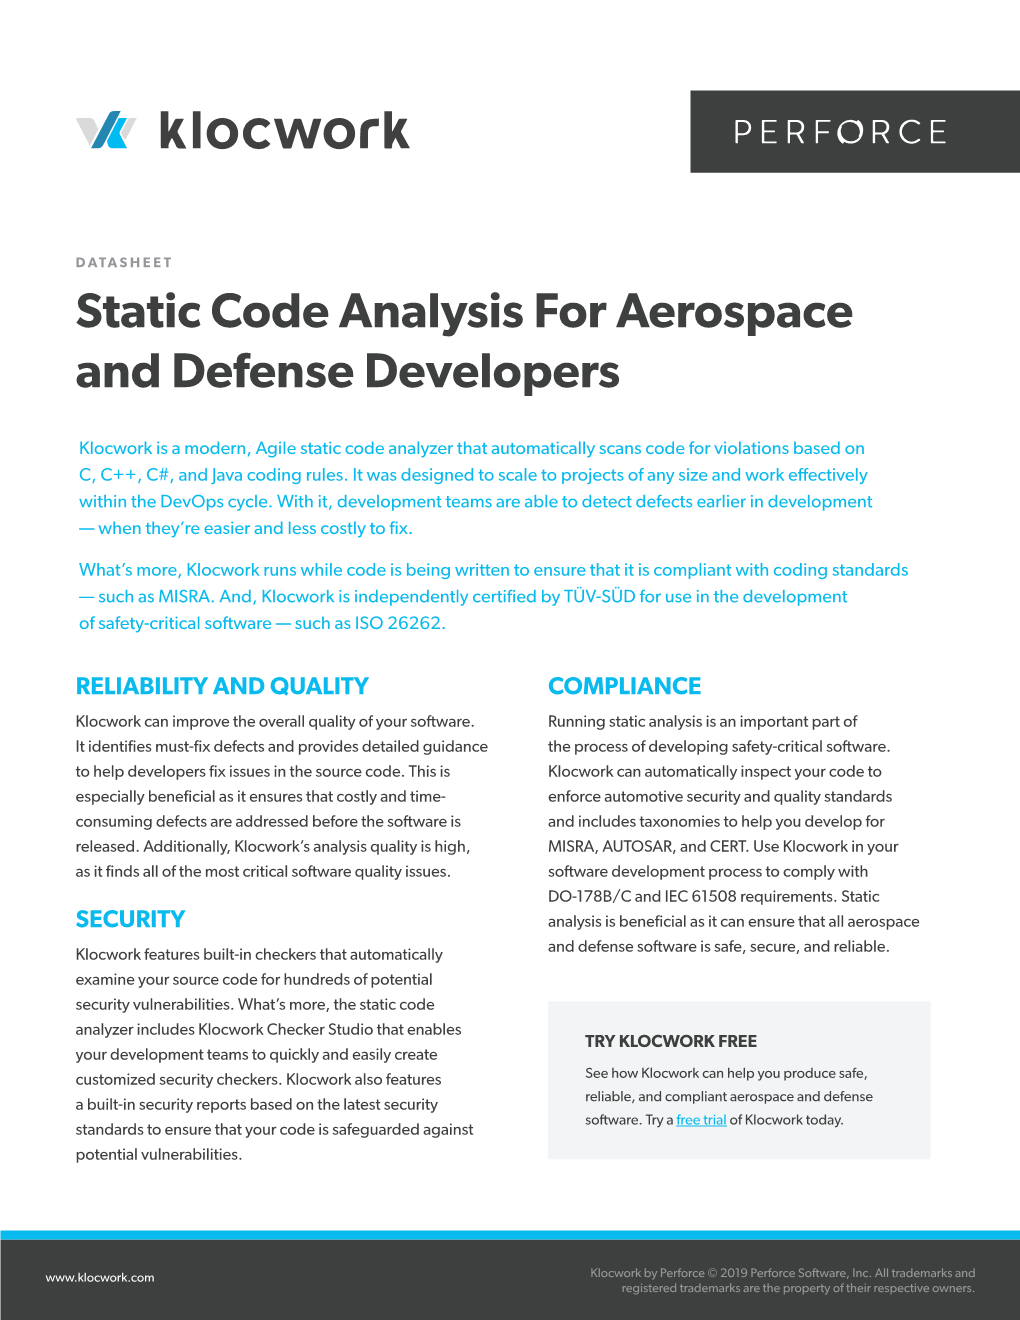 Static Code Analysis for Aerospace and Defense Developers